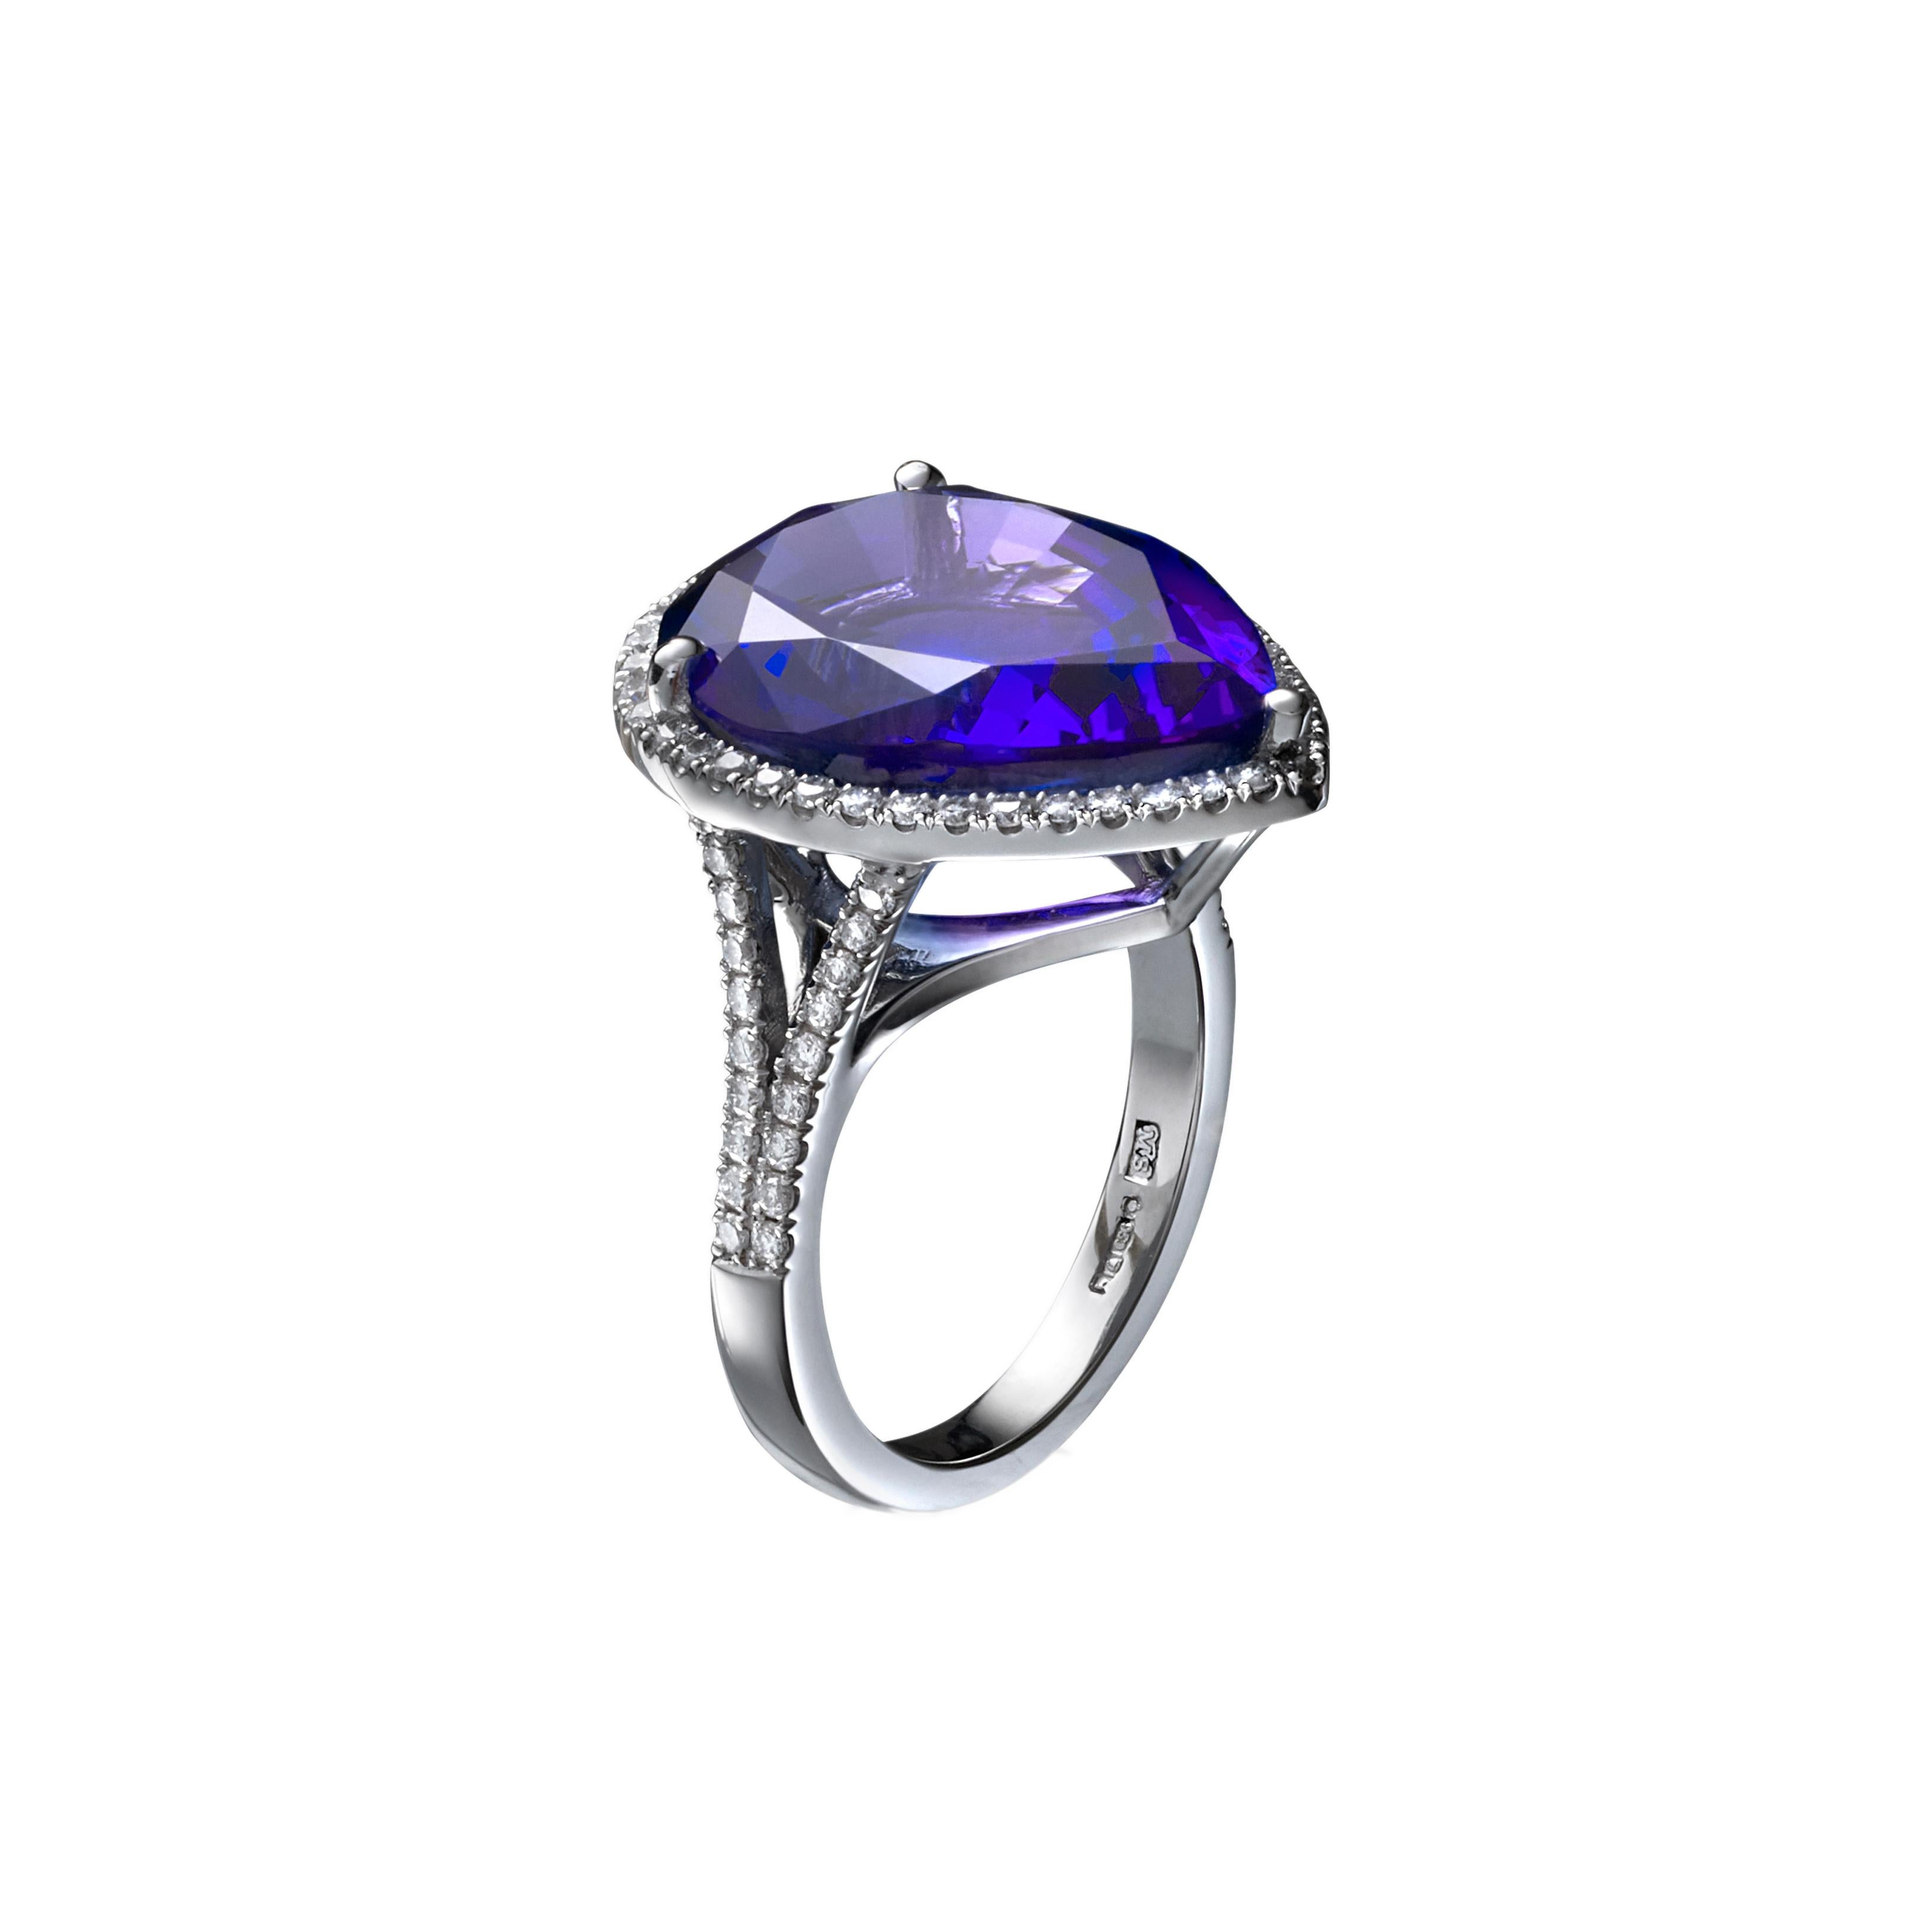 Rare blue 10.35 Carat Pear Shaped Tanzanite Diamond And Platinum Engagement Ring. This stunning Tanzanite draws your attention with its rare marvelous velvety blue colour and brightness. Crafted in platinum for beauty strength and durability,